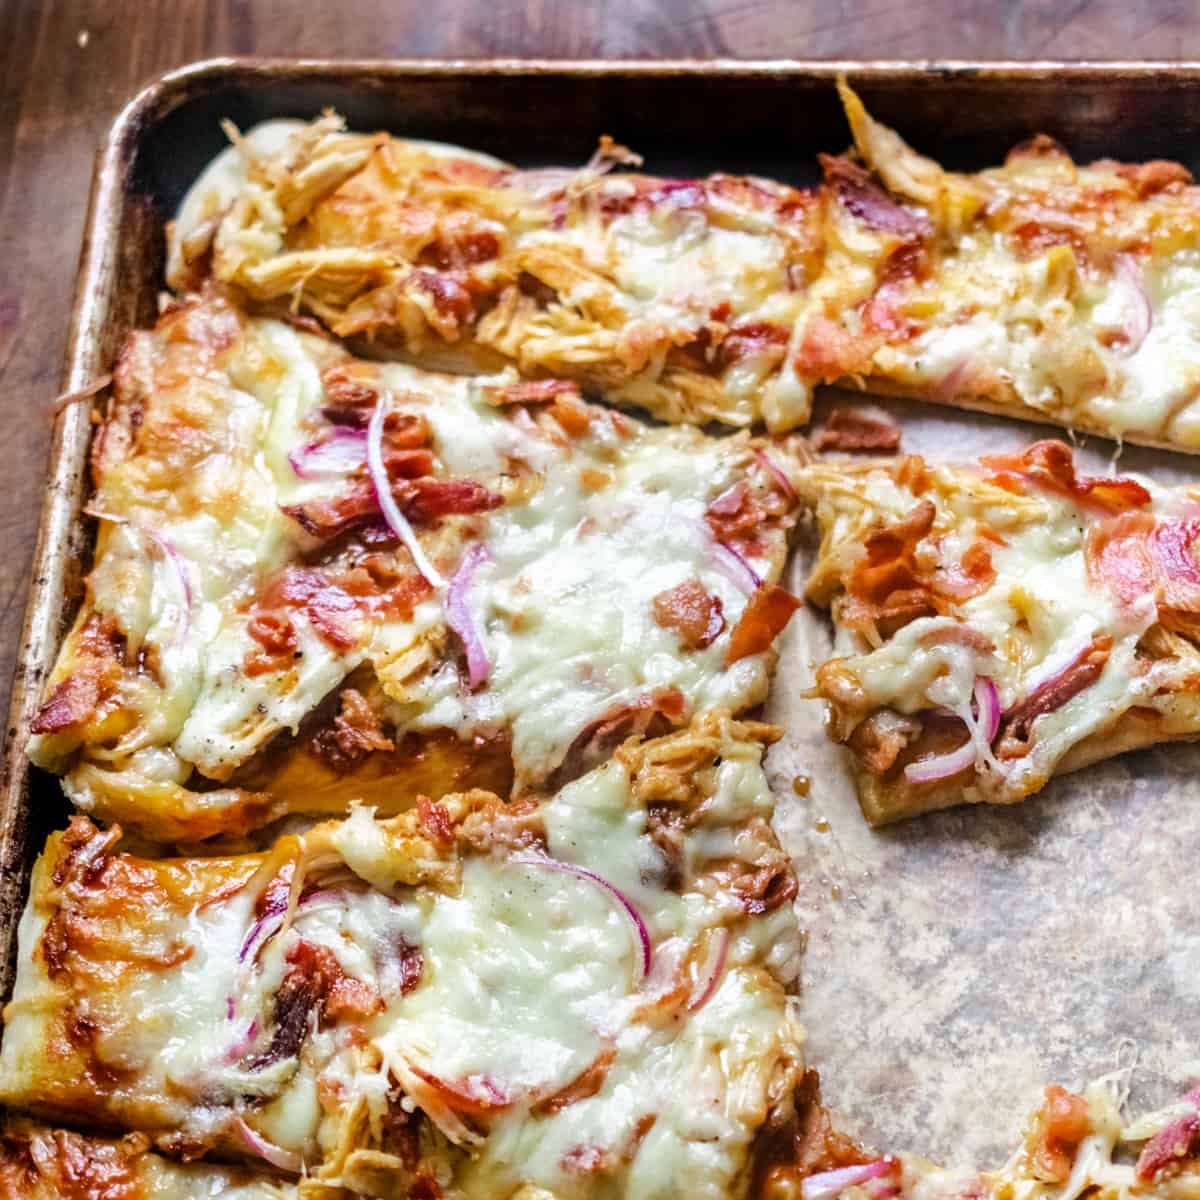 Flatbread pizza with barbecue sauce, cheese, chicken, and red onion.